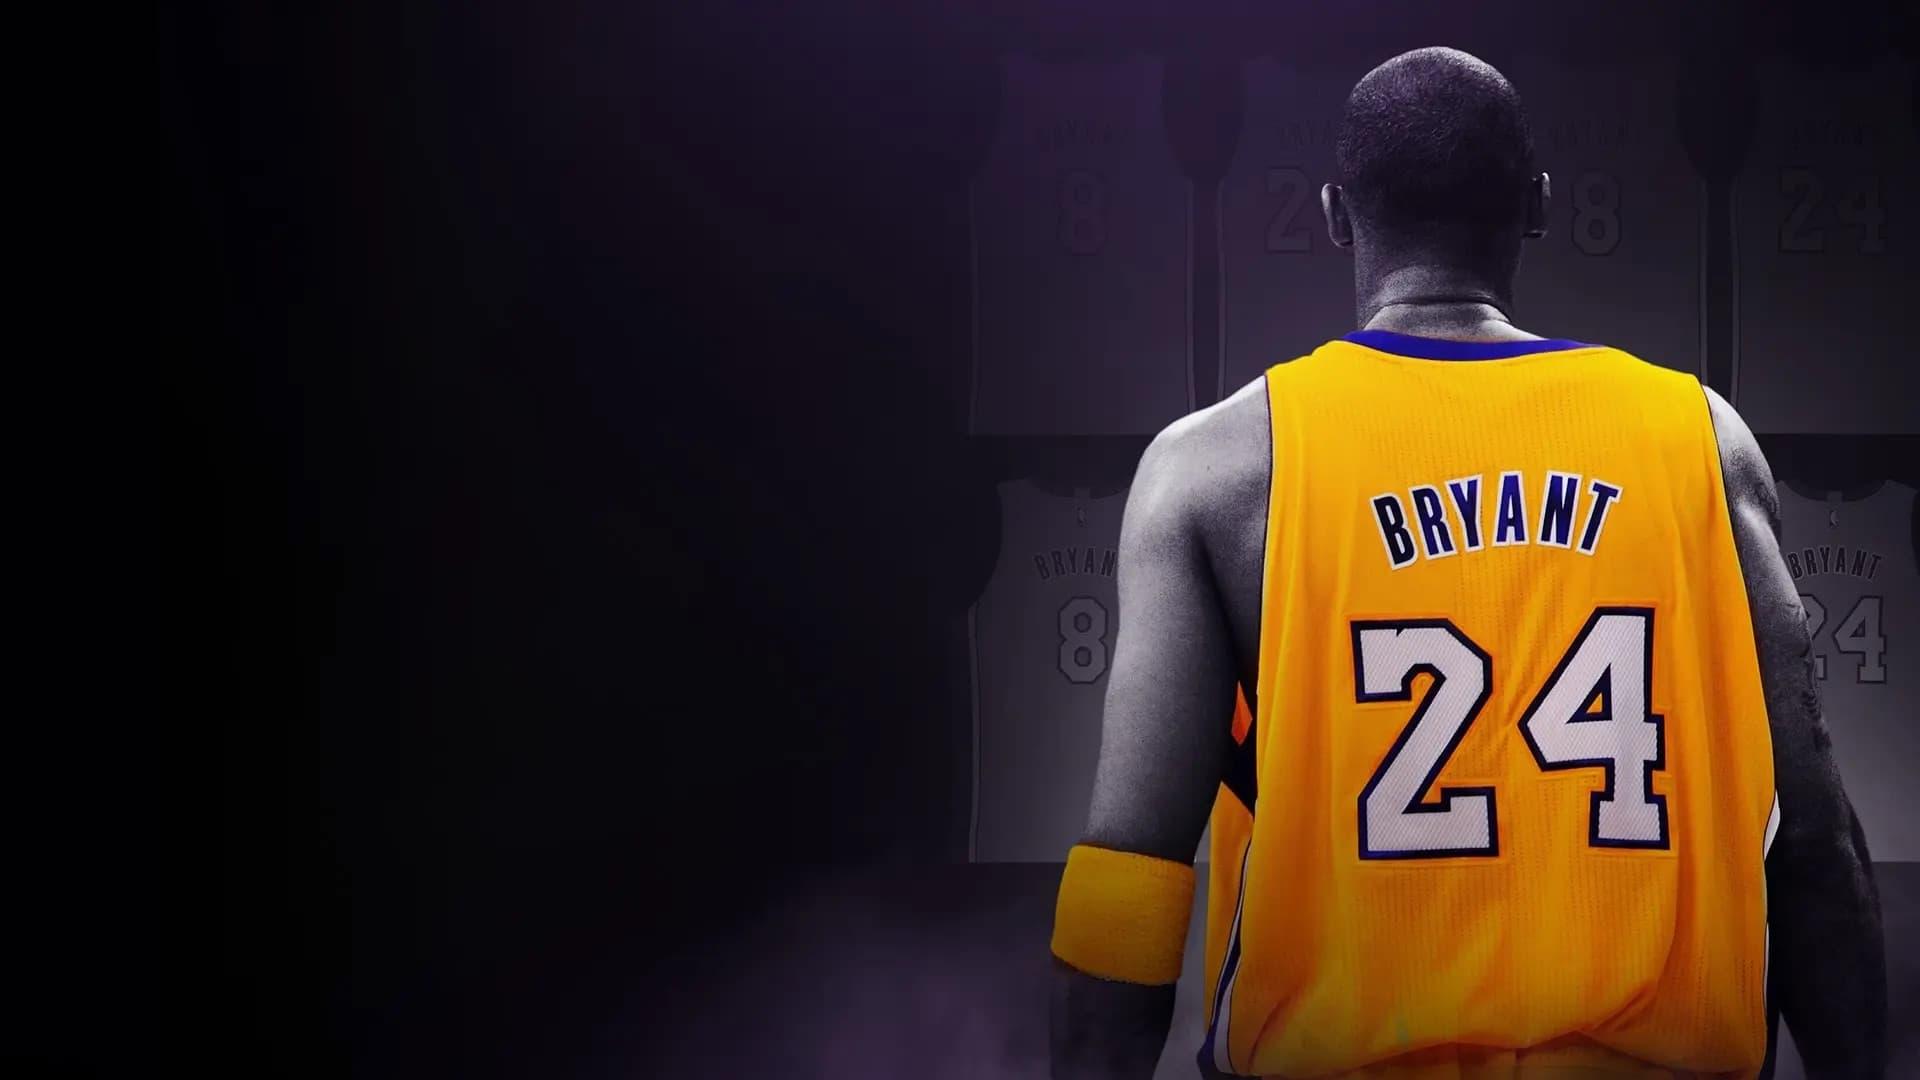 Gone Before His Time: Kobe Bryant backdrop